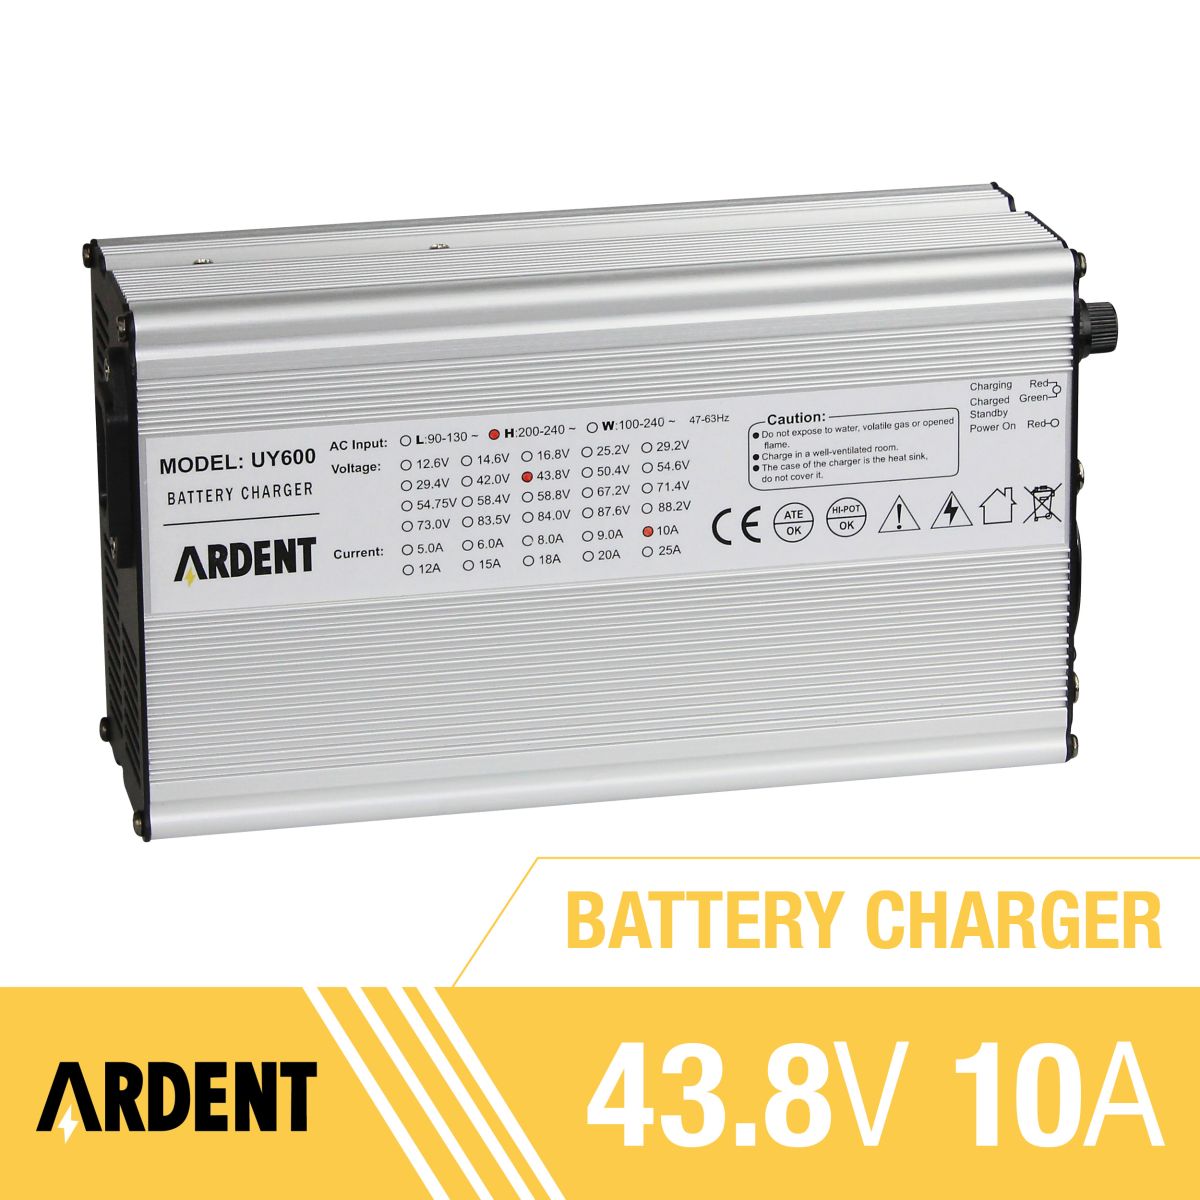 Ardent 43.8V 10A Lithium Battery Charger 